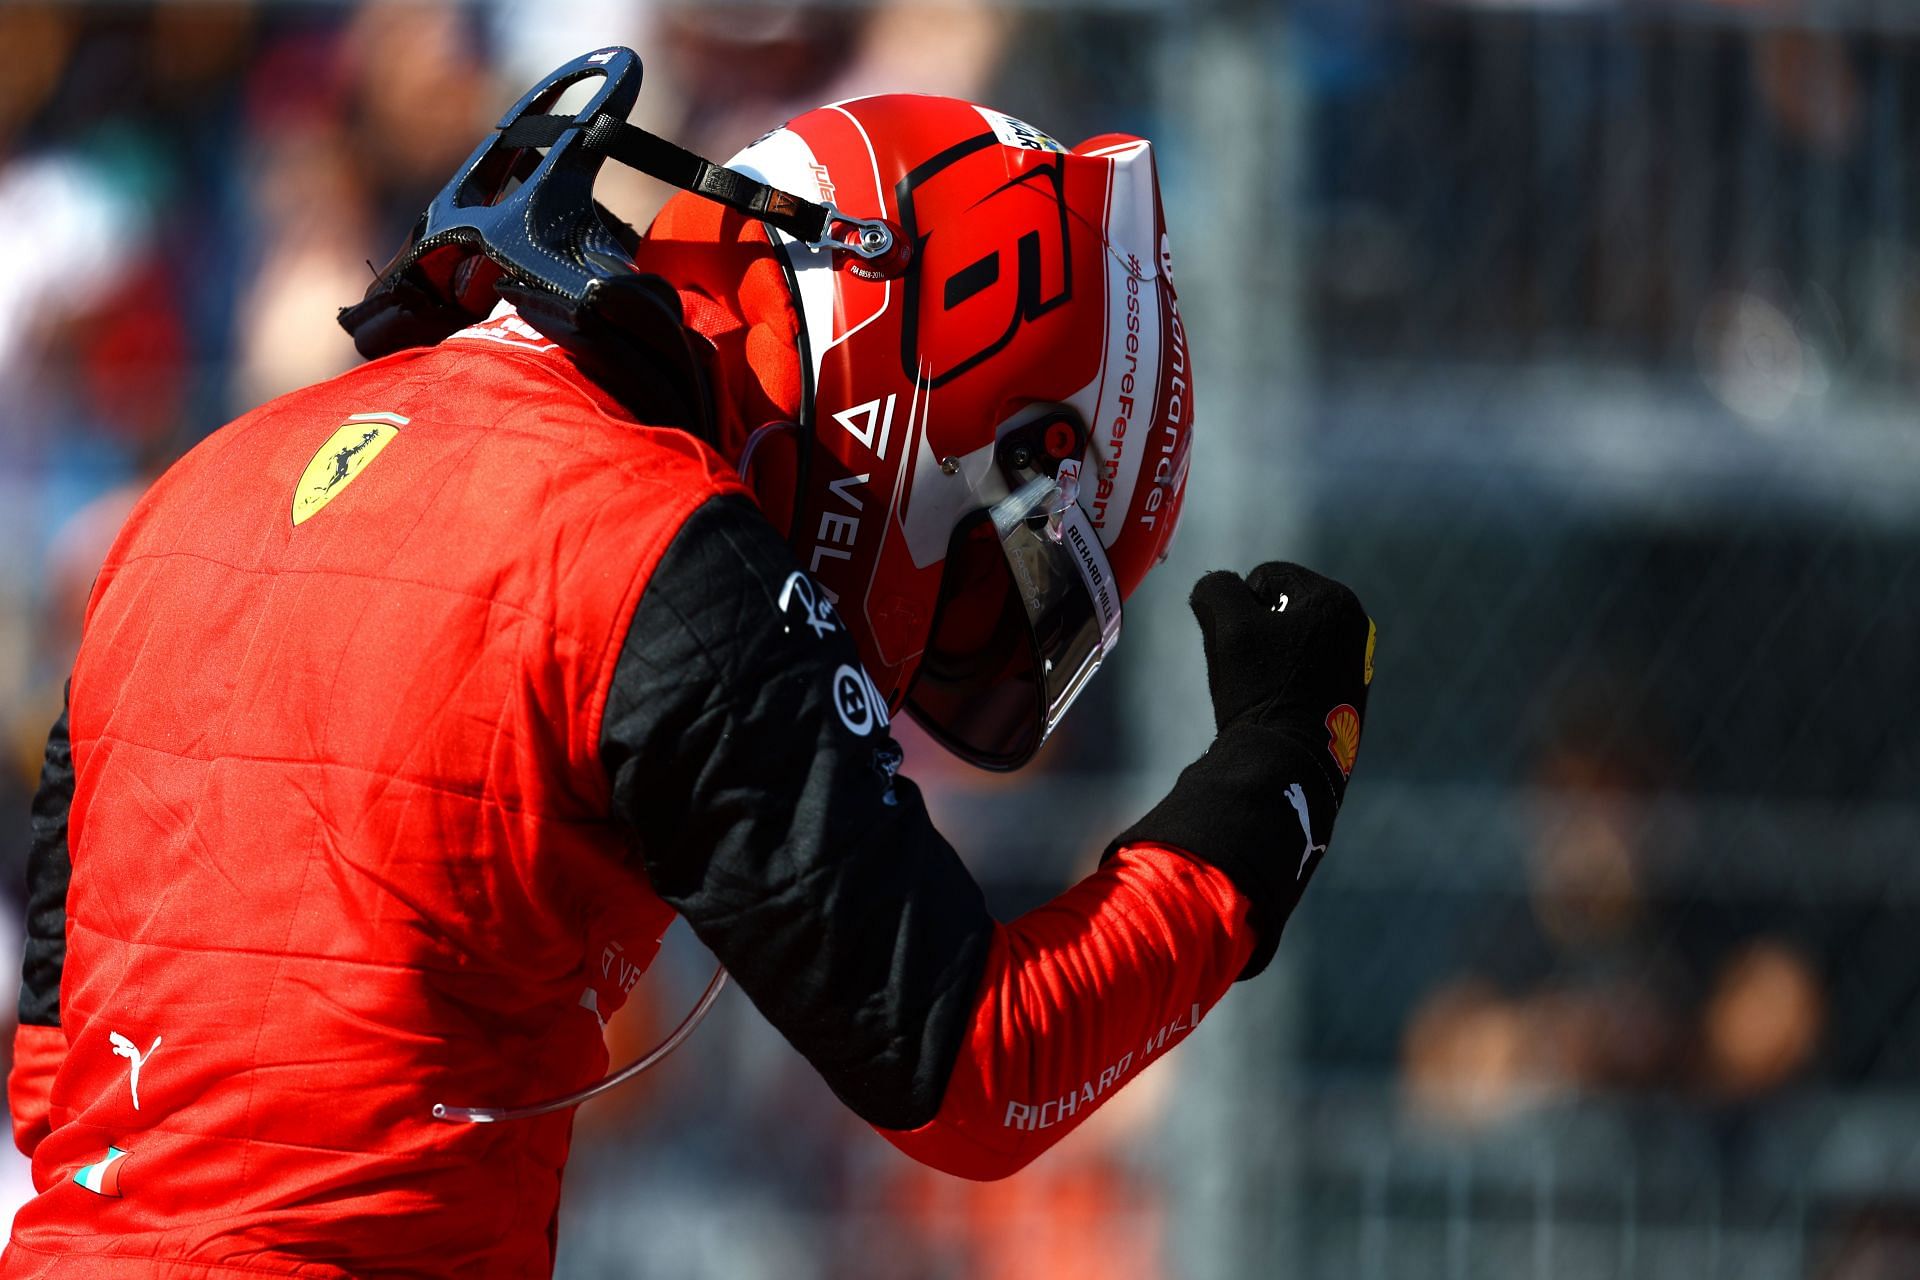 F1 Grand Prix of Miami - Qualifying - Charles Leclerc takes pole position